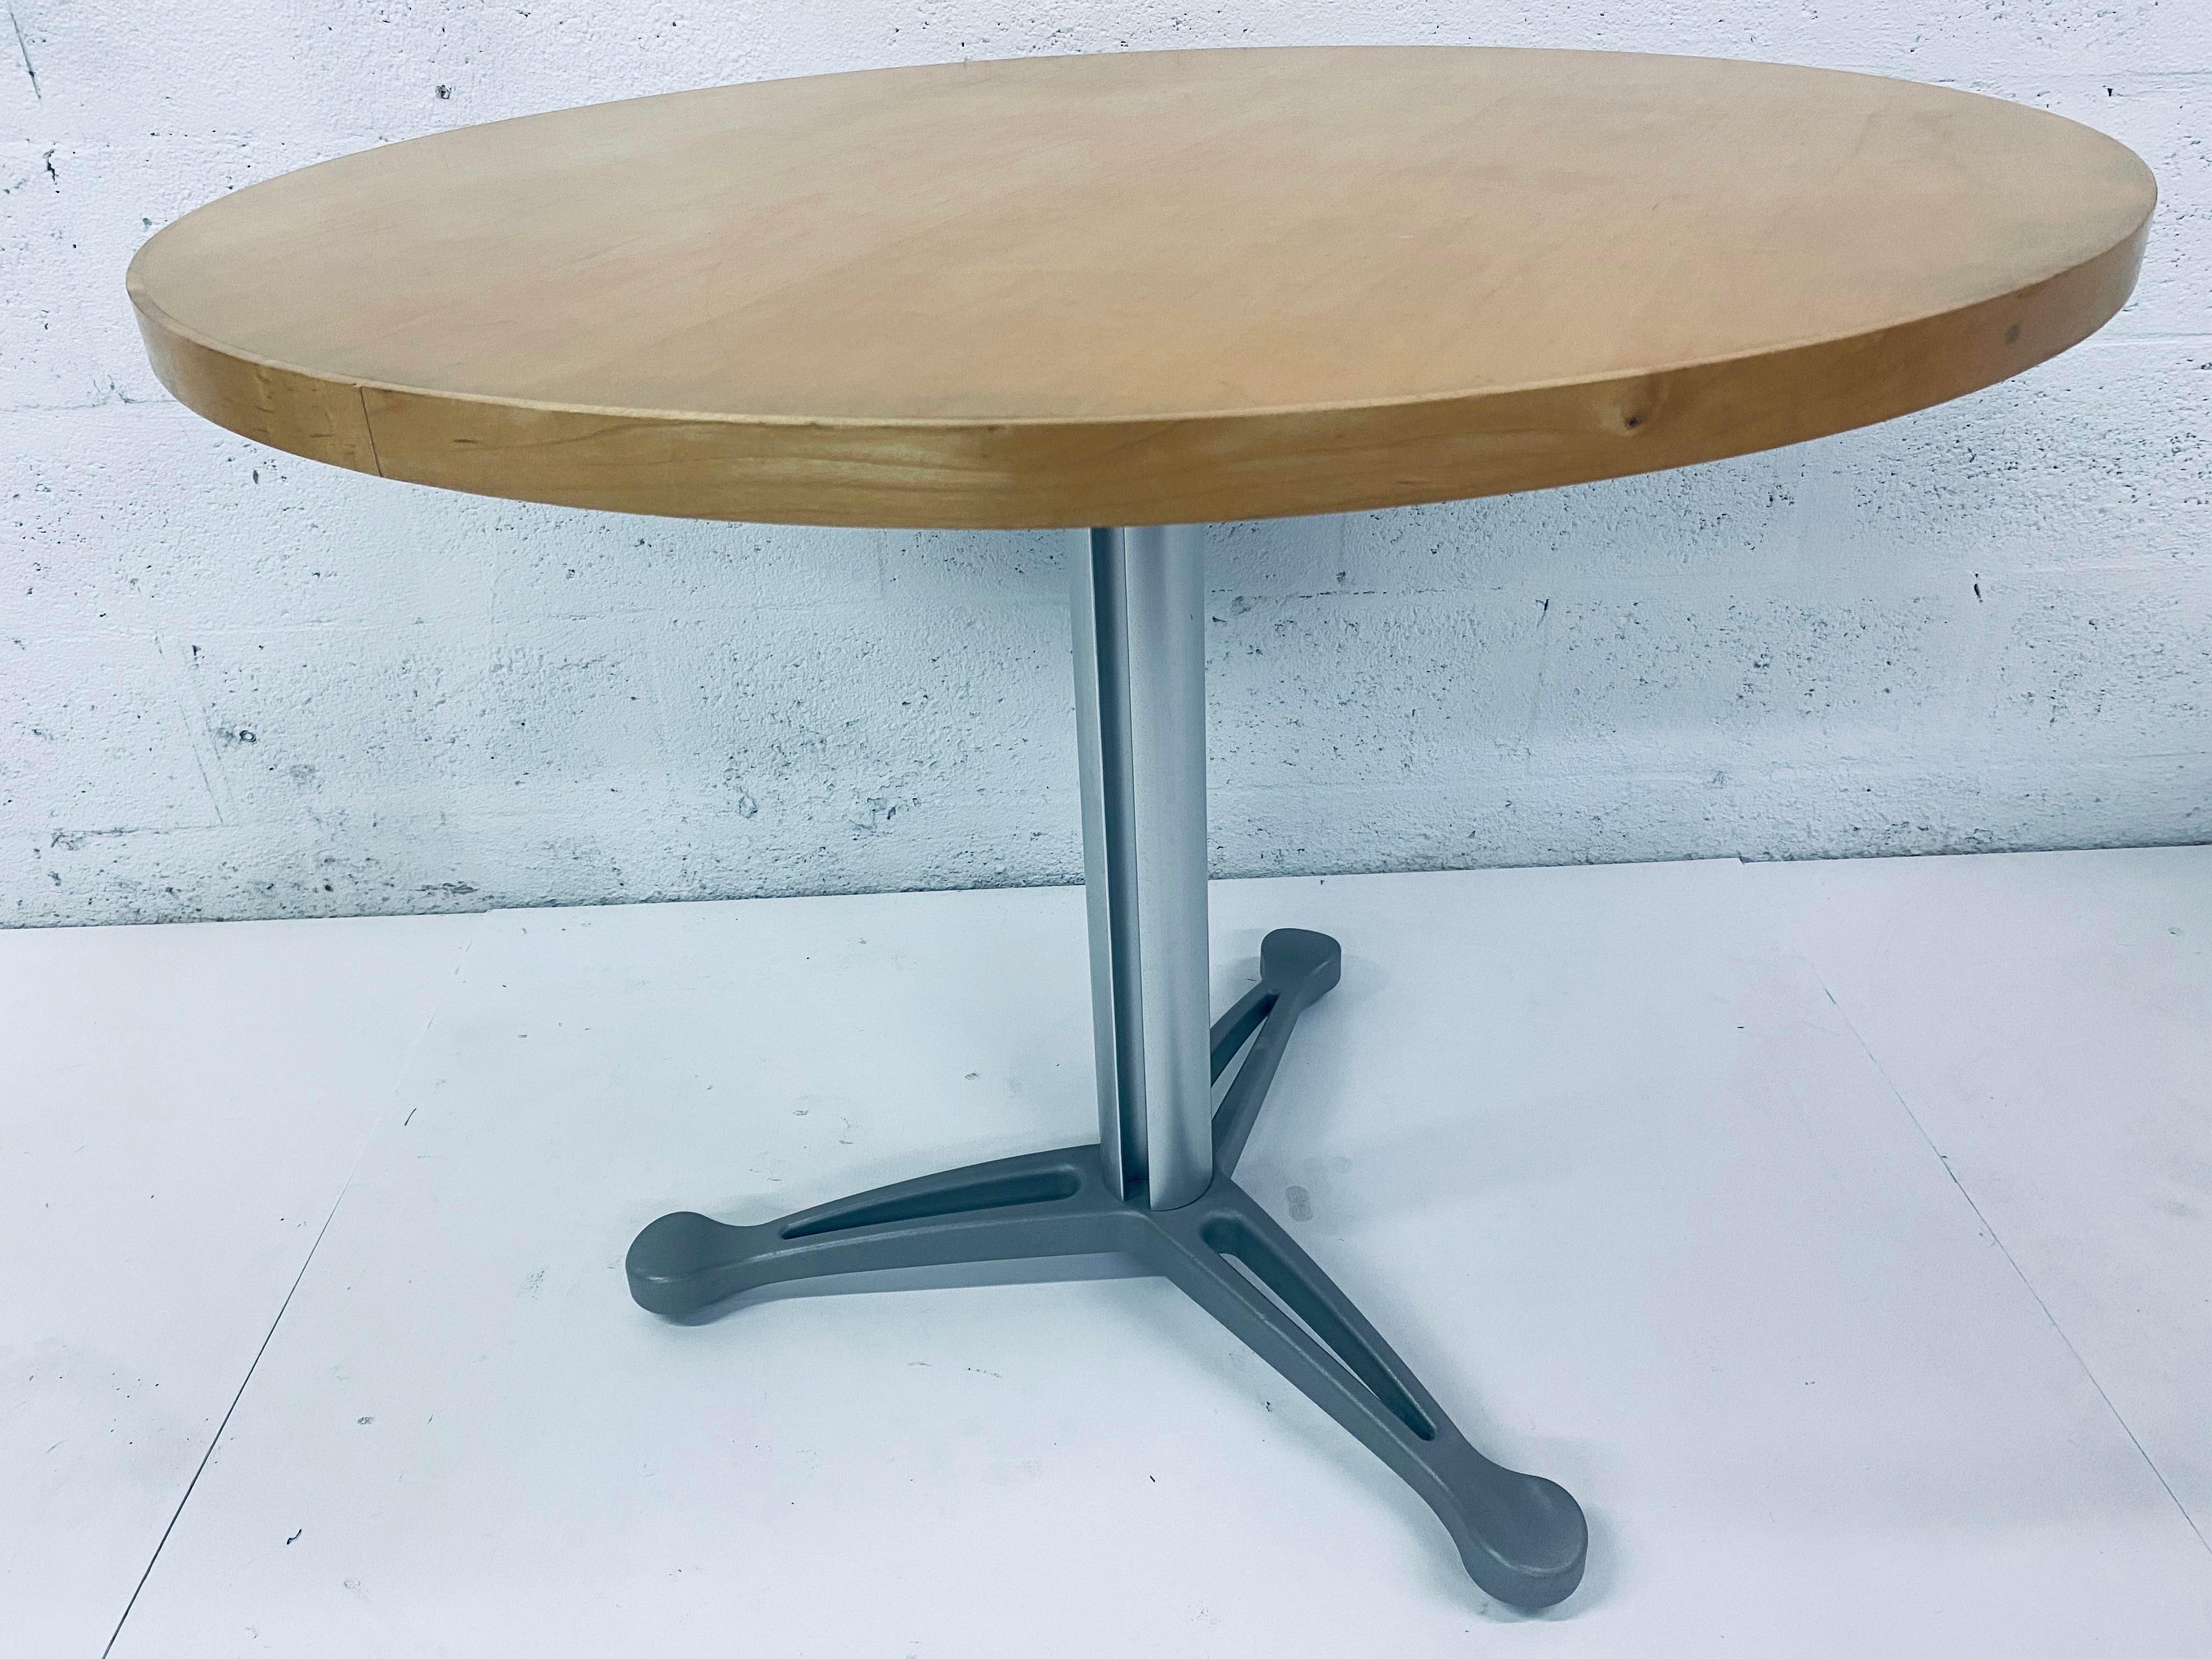 Emanuela Frattini “Propeller” Table for Knoll In Good Condition For Sale In Miami, FL